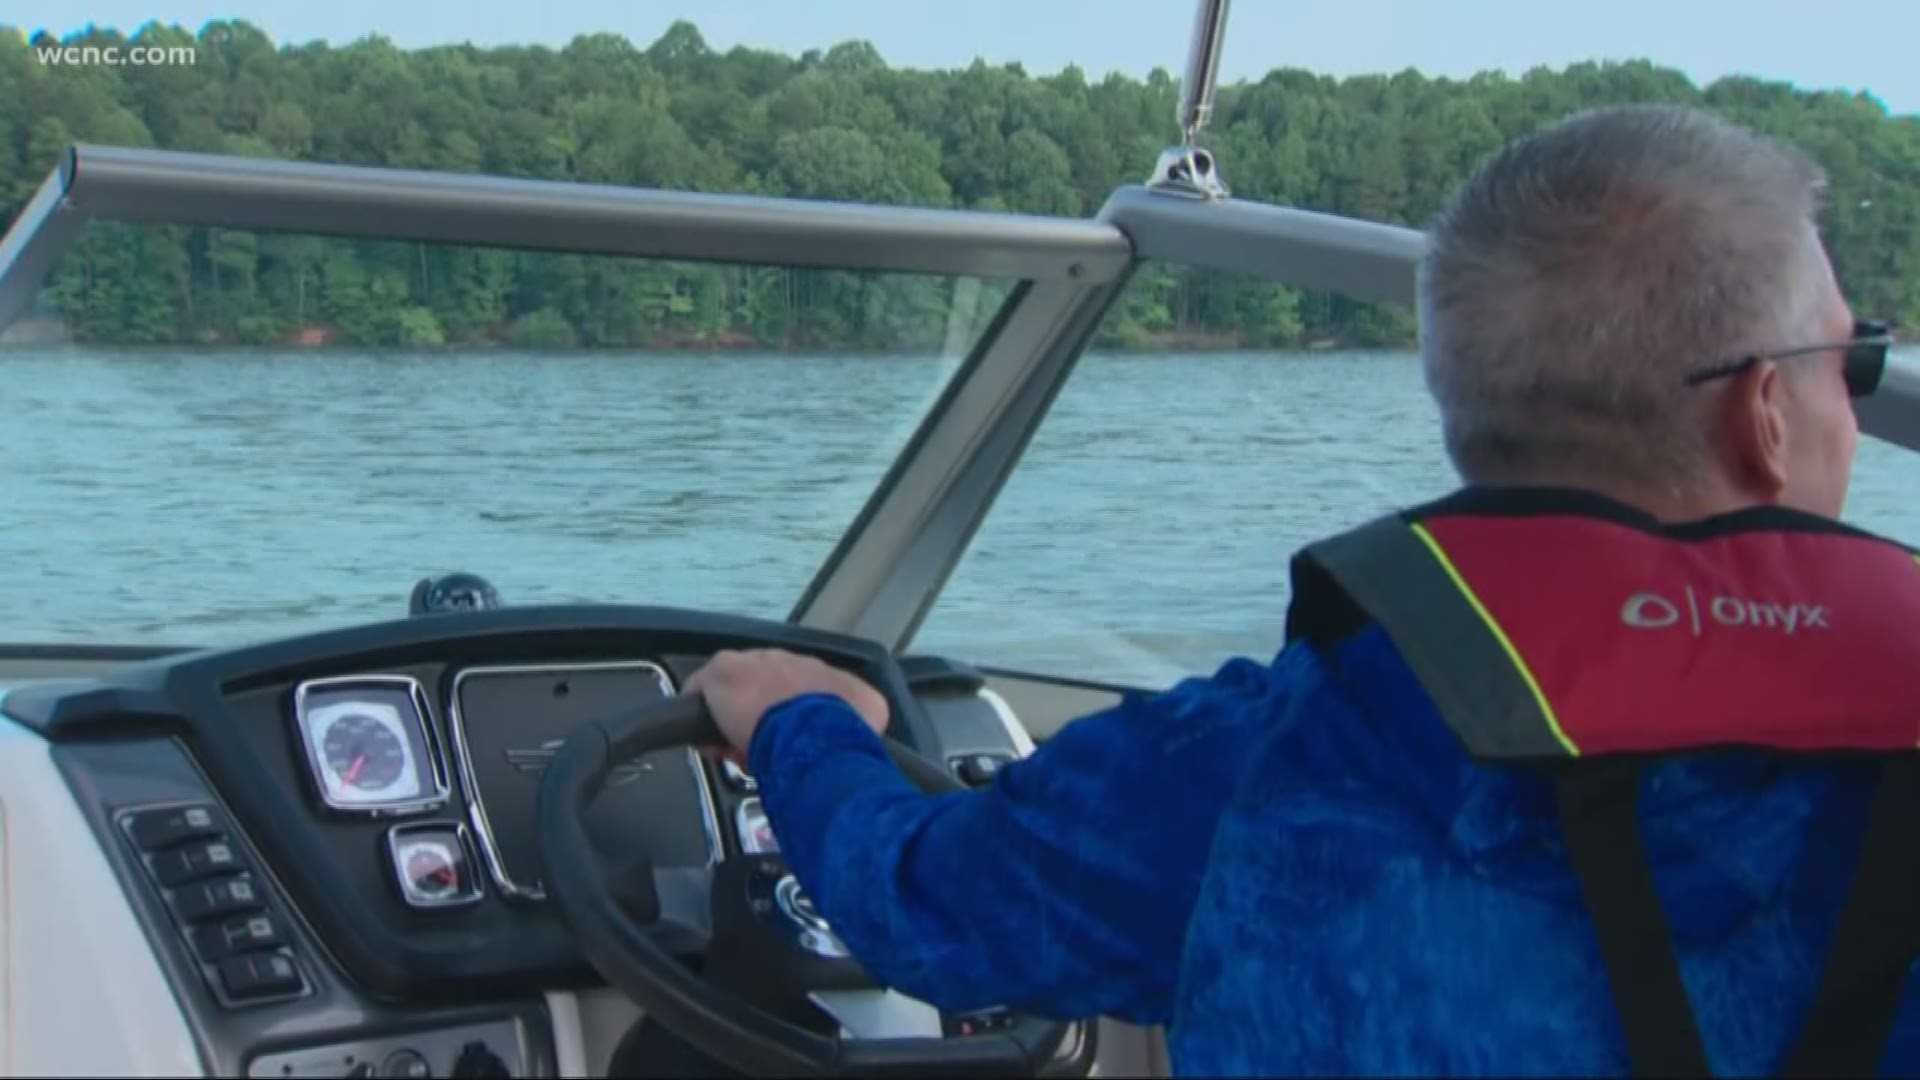 Officials say the last few years, the 4th of July has been relatively safe out on the lakes. To keep that the same this year, they'll be out patrolling and enforcing the laws.